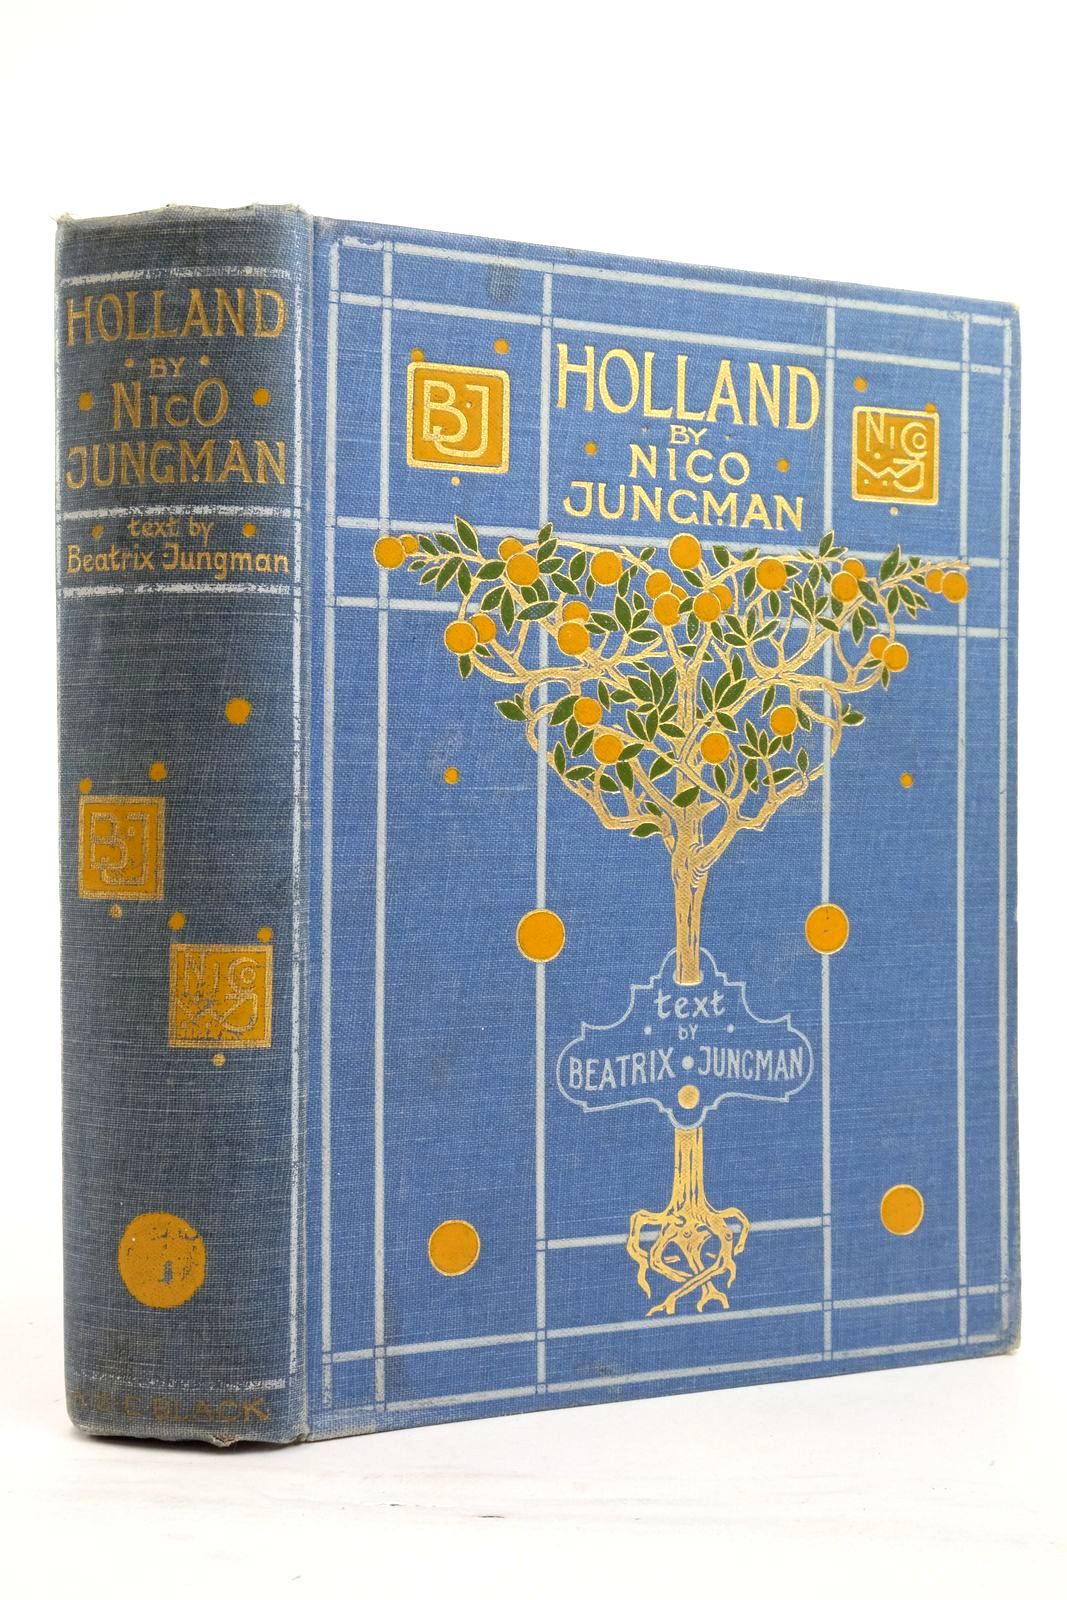 Photo of HOLLAND written by Jungman, Beatrix illustrated by Jungman, Nico published by Adam & Charles Black (STOCK CODE: 2137219)  for sale by Stella & Rose's Books